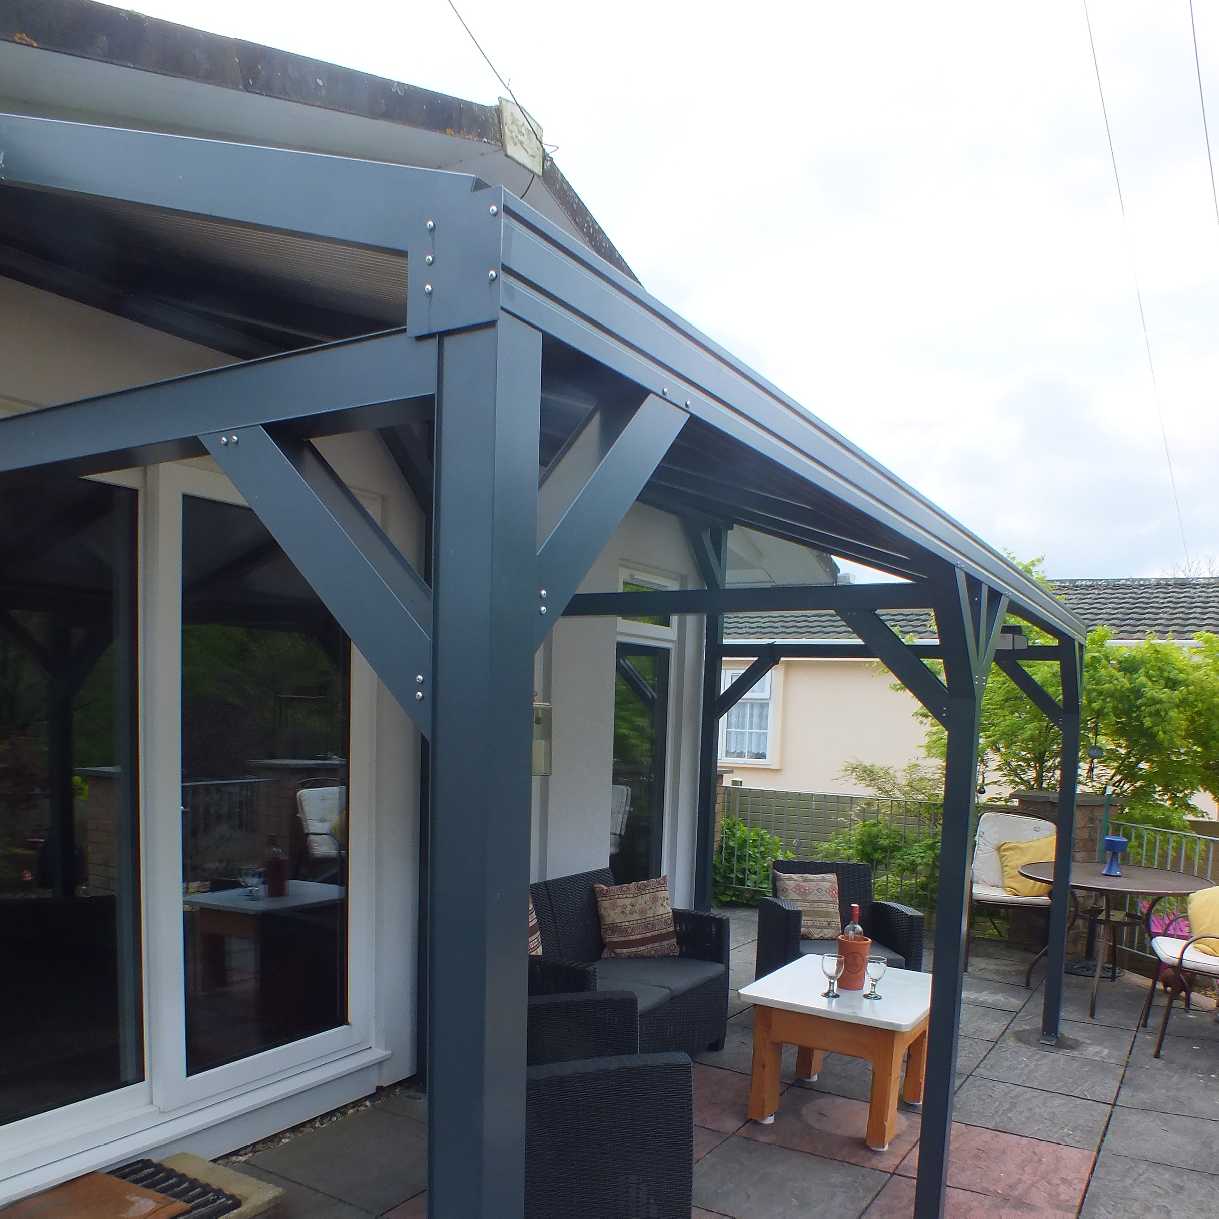 Affordable Omega Smart Free-Standing, Anthracite Grey MonoPitch Roof Canopy with 16mm Polycarbonate Glazing - 4.2m (W) x 4.0m (P), (6) Supporting Posts